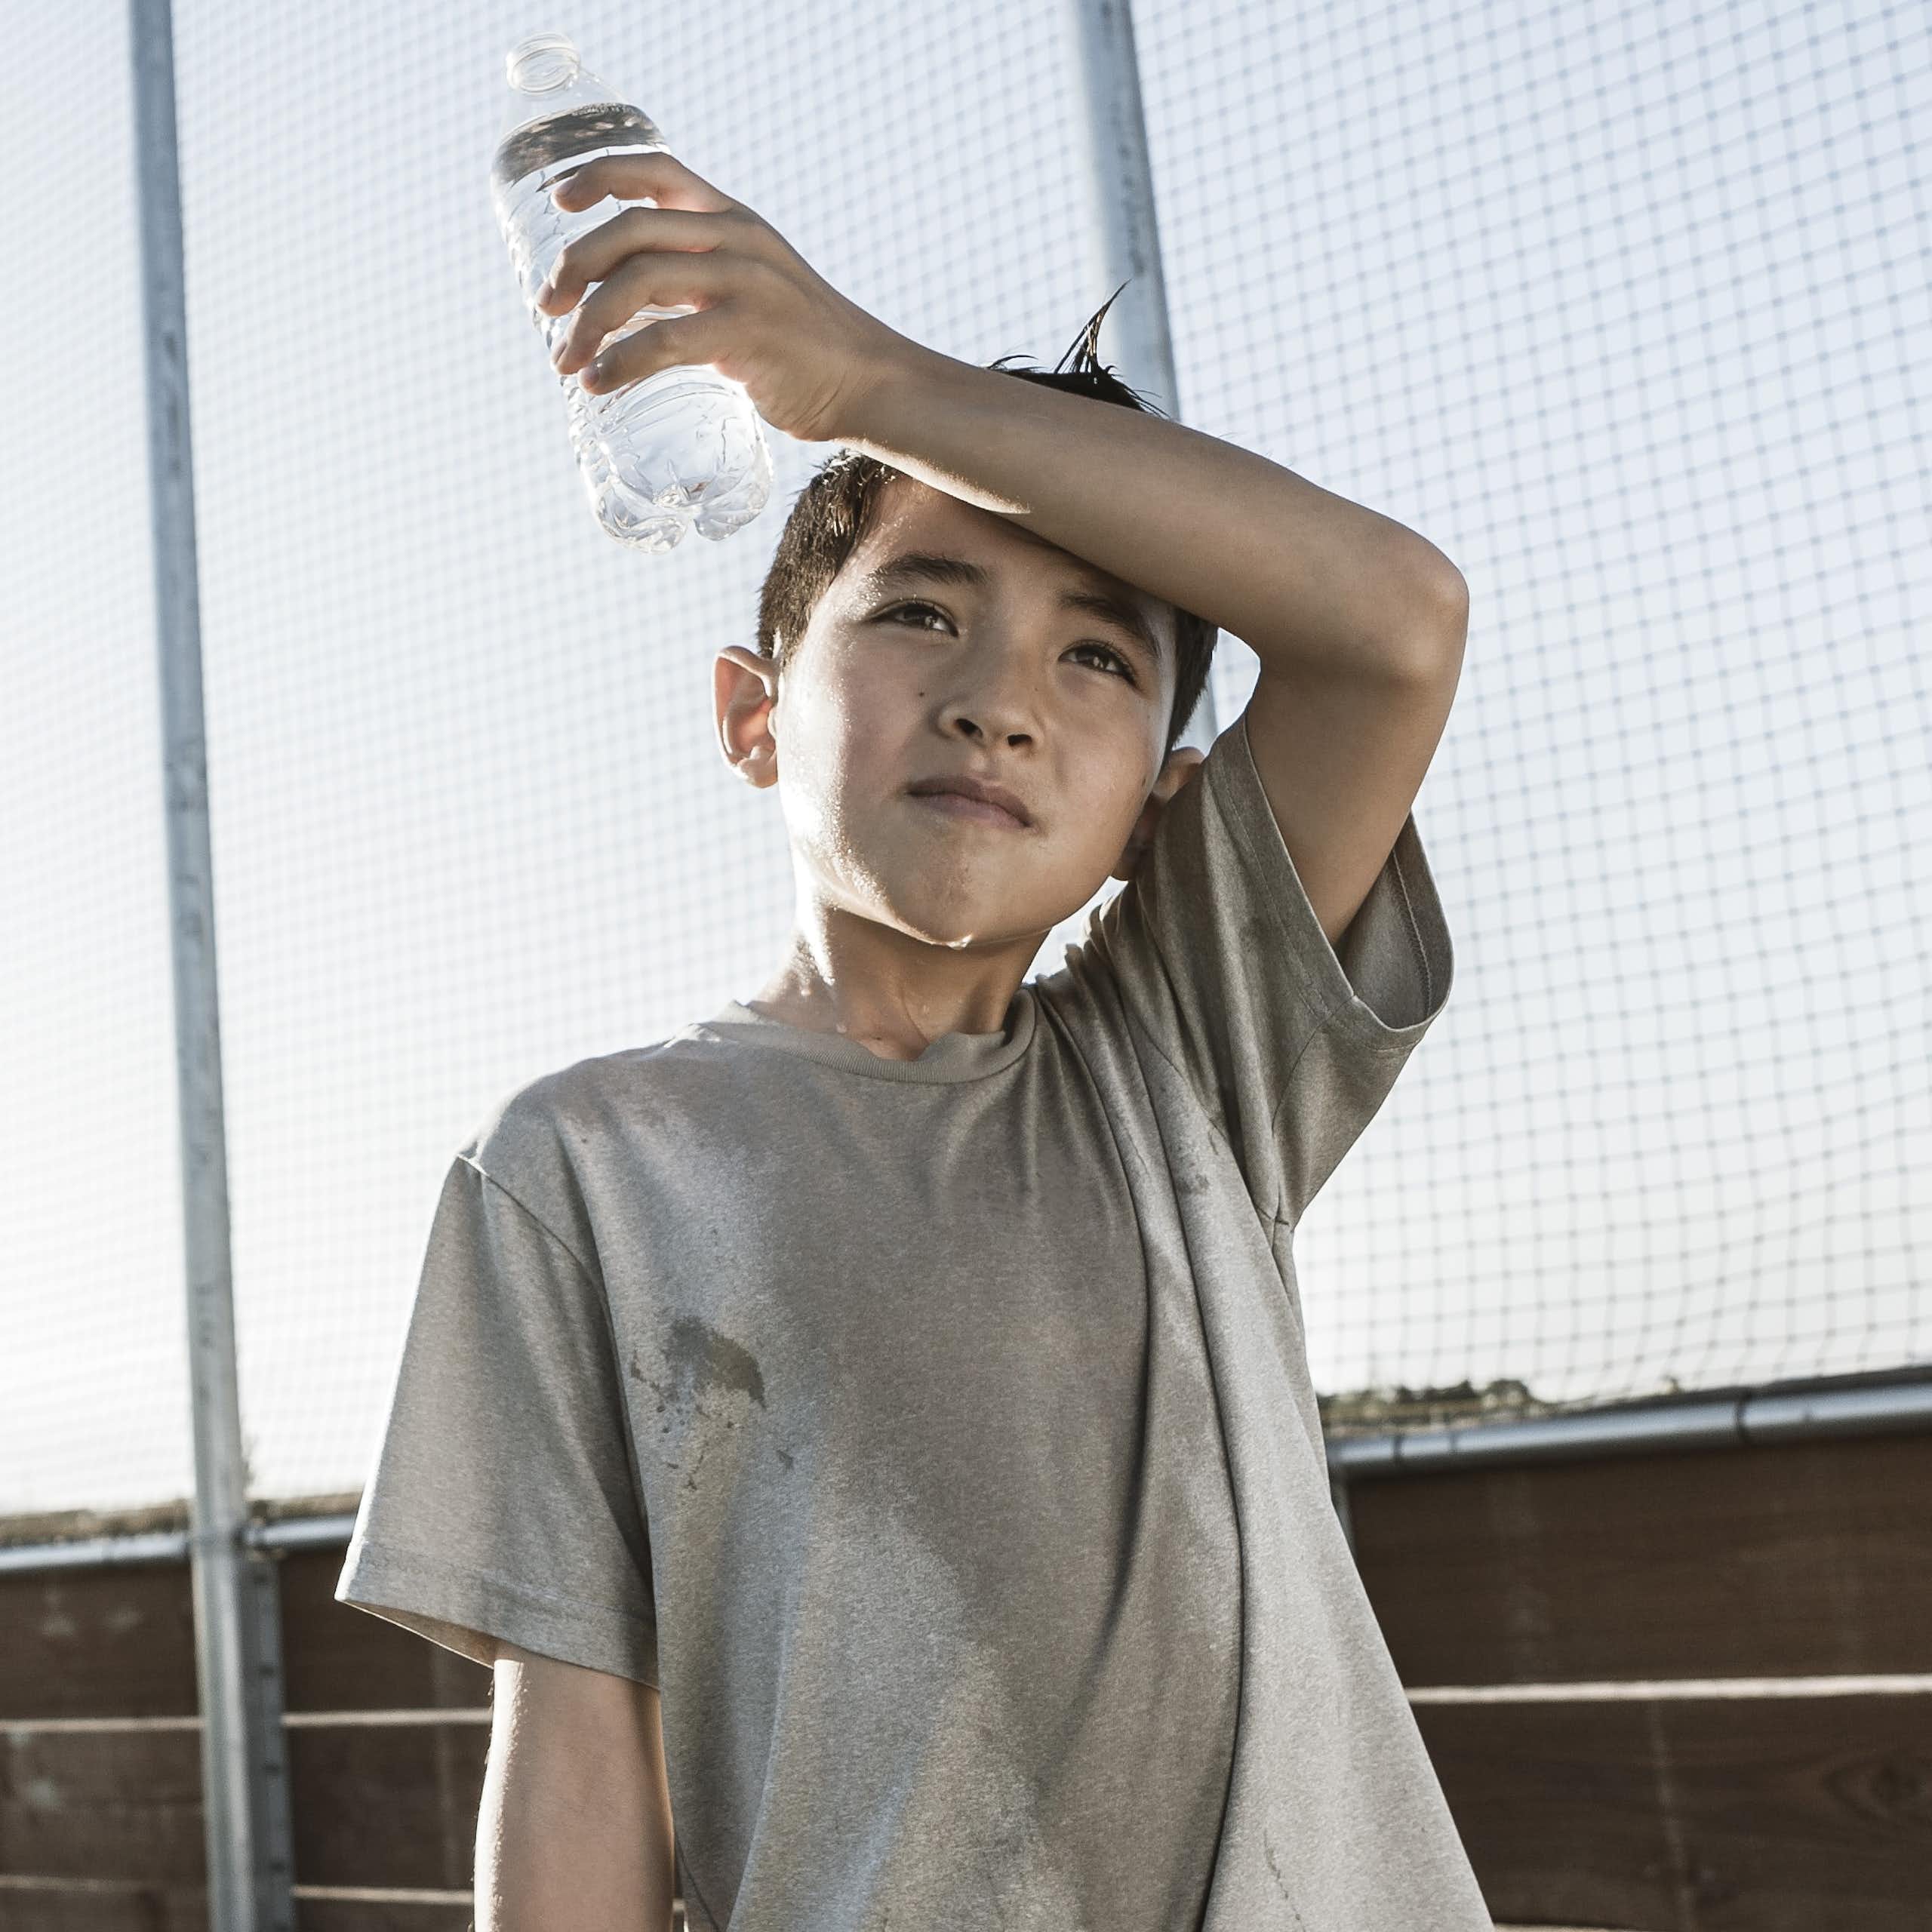 A boy with sweaty shirt wipes sweat off his face while holding a water bottle. A ball field is behind him.